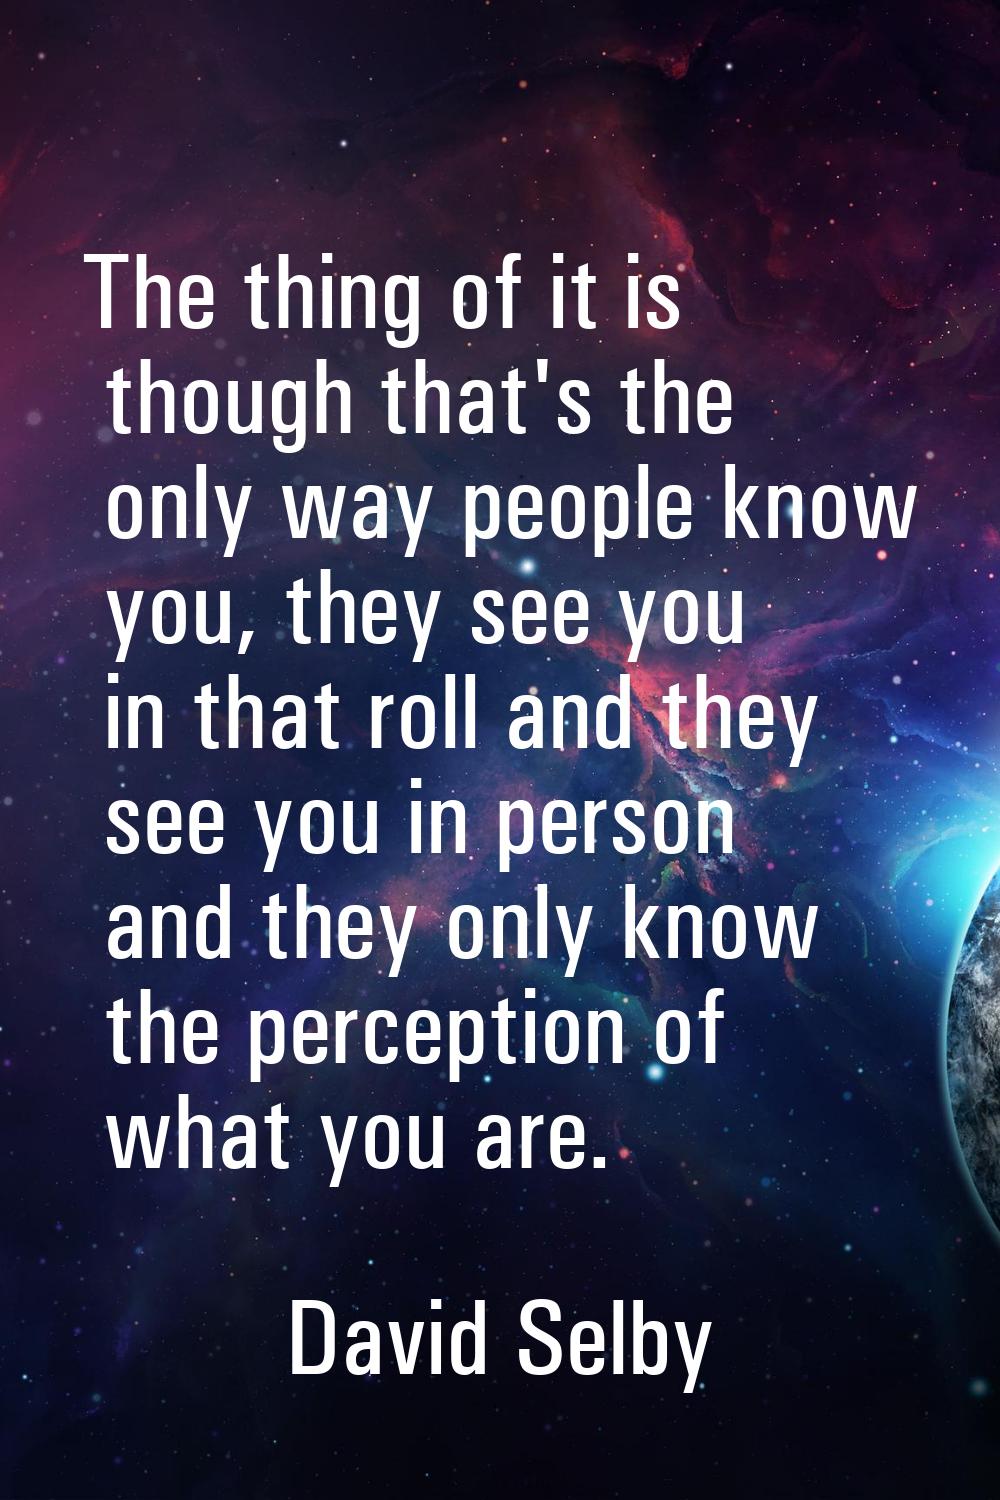 The thing of it is though that's the only way people know you, they see you in that roll and they s